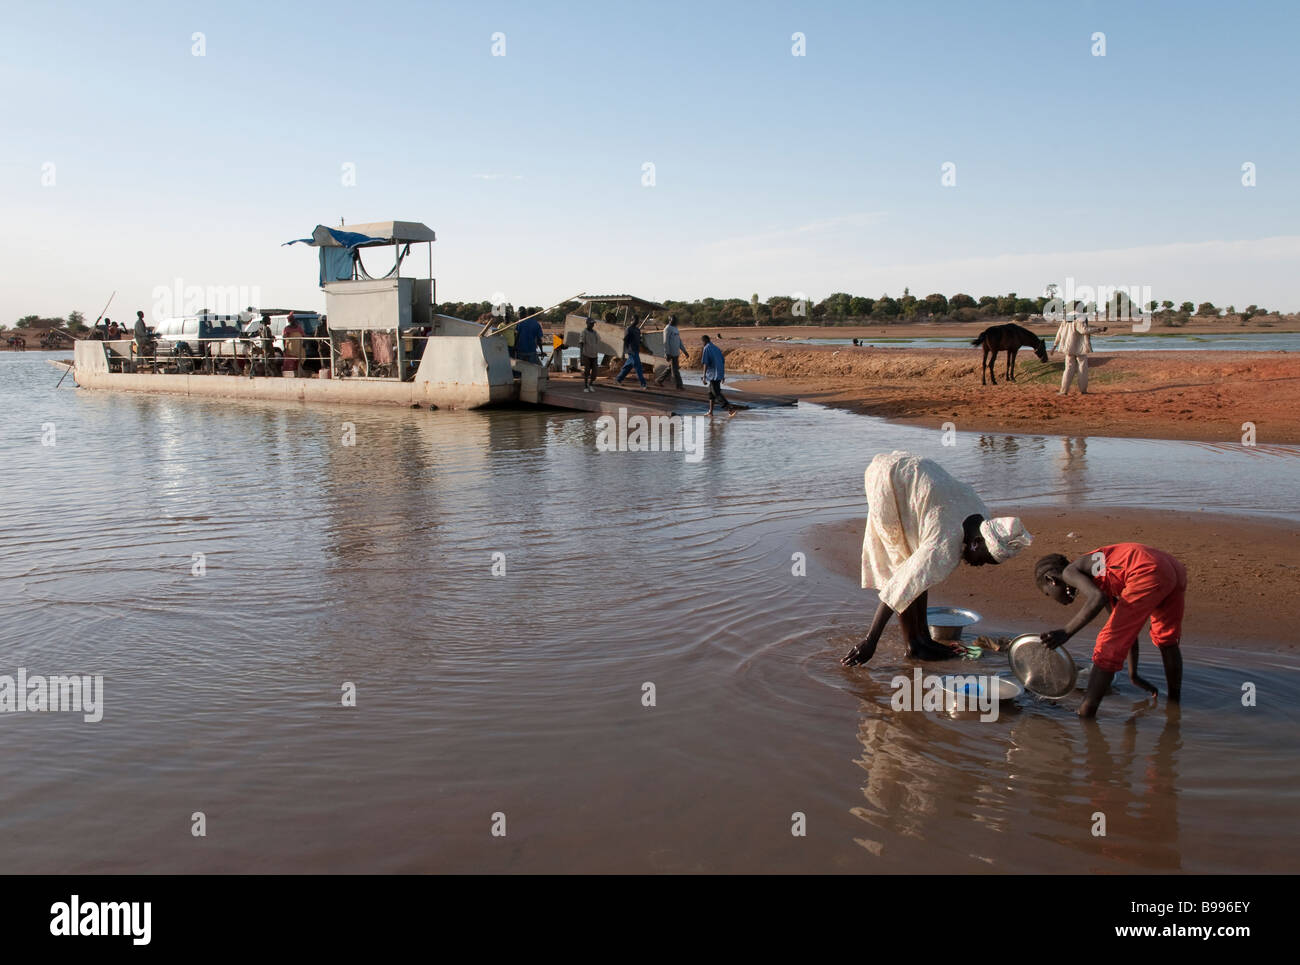 West africa Mali Djenne public ferry accross the Bani river to access the town of Djenne Stock Photo